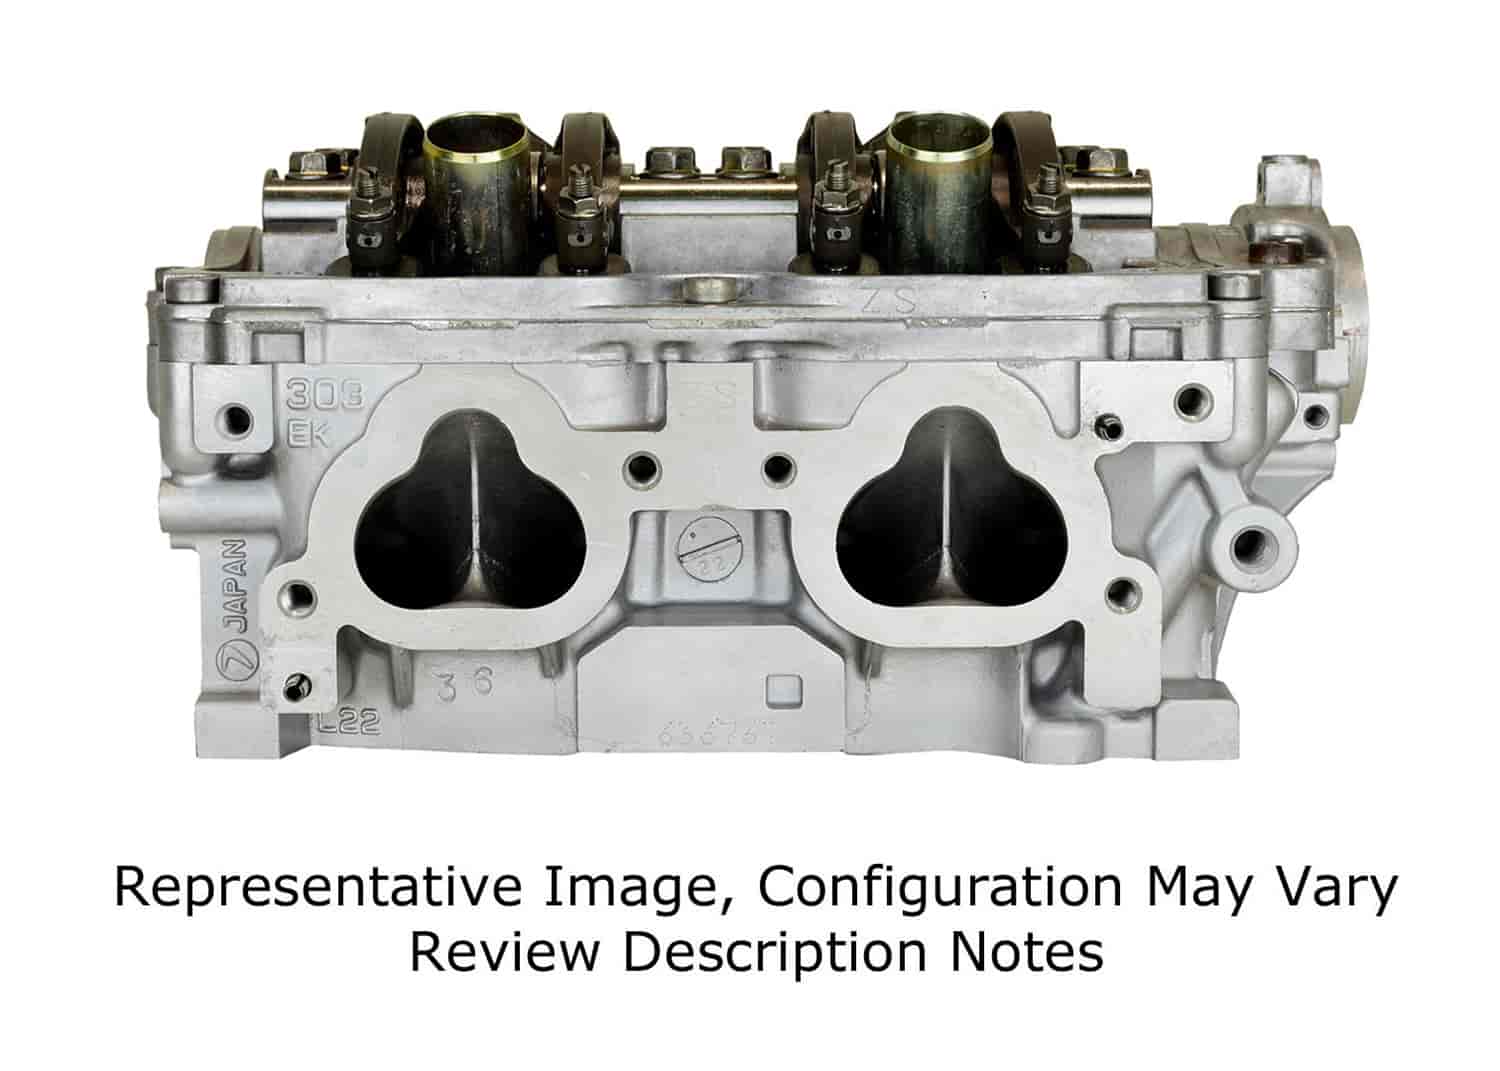 Remanufactured Cylinder Head for 1999-2001 Subaru with 2.2L H4